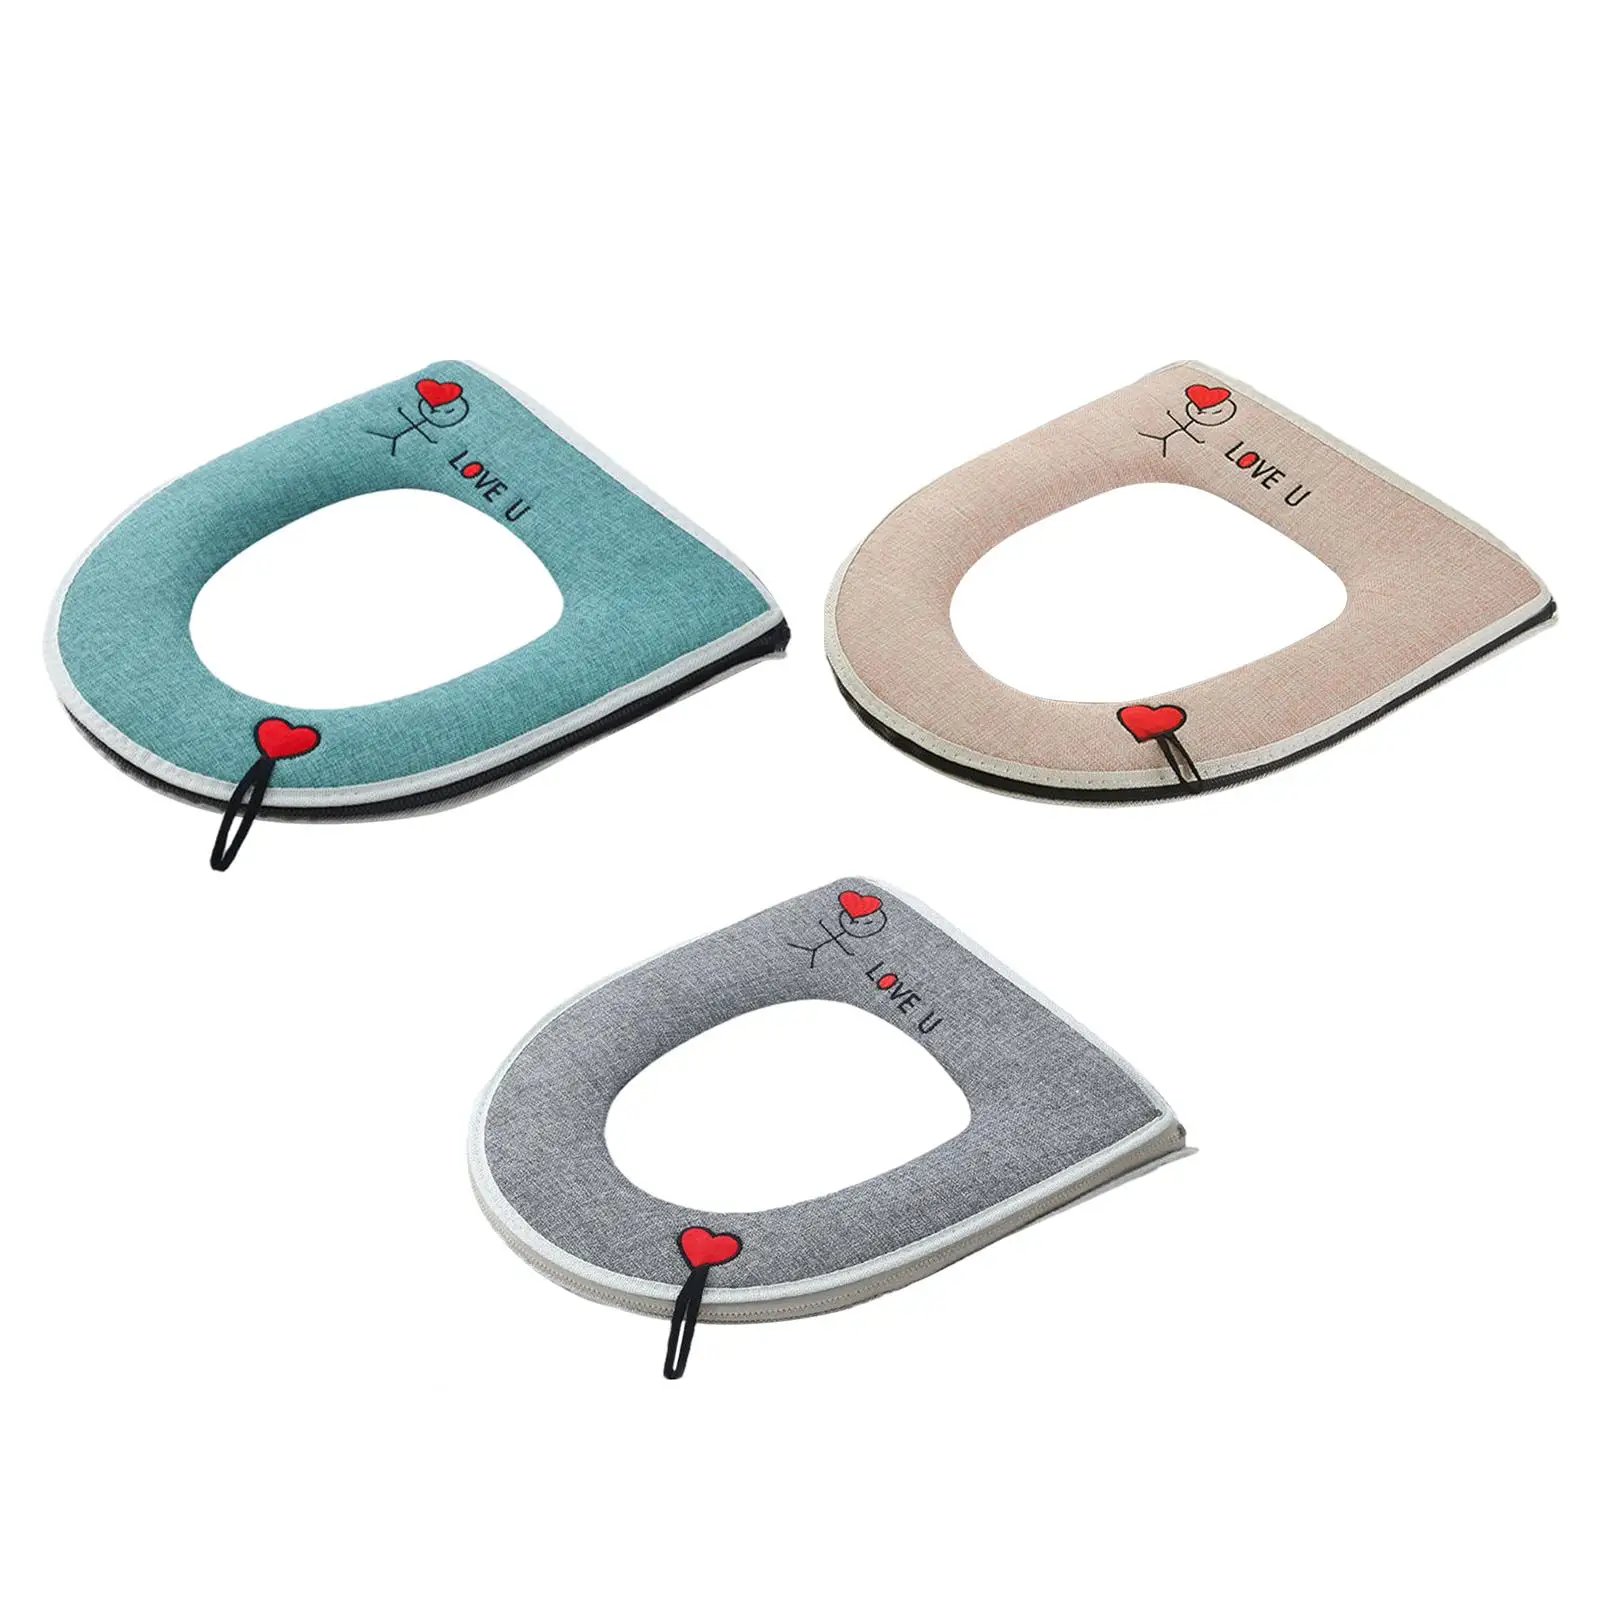 Toilet Seat Cushion Reusable Portable Soft Toilet Seat Cover Universal Toilet Seat Mat for Traveling Home Hotel Household